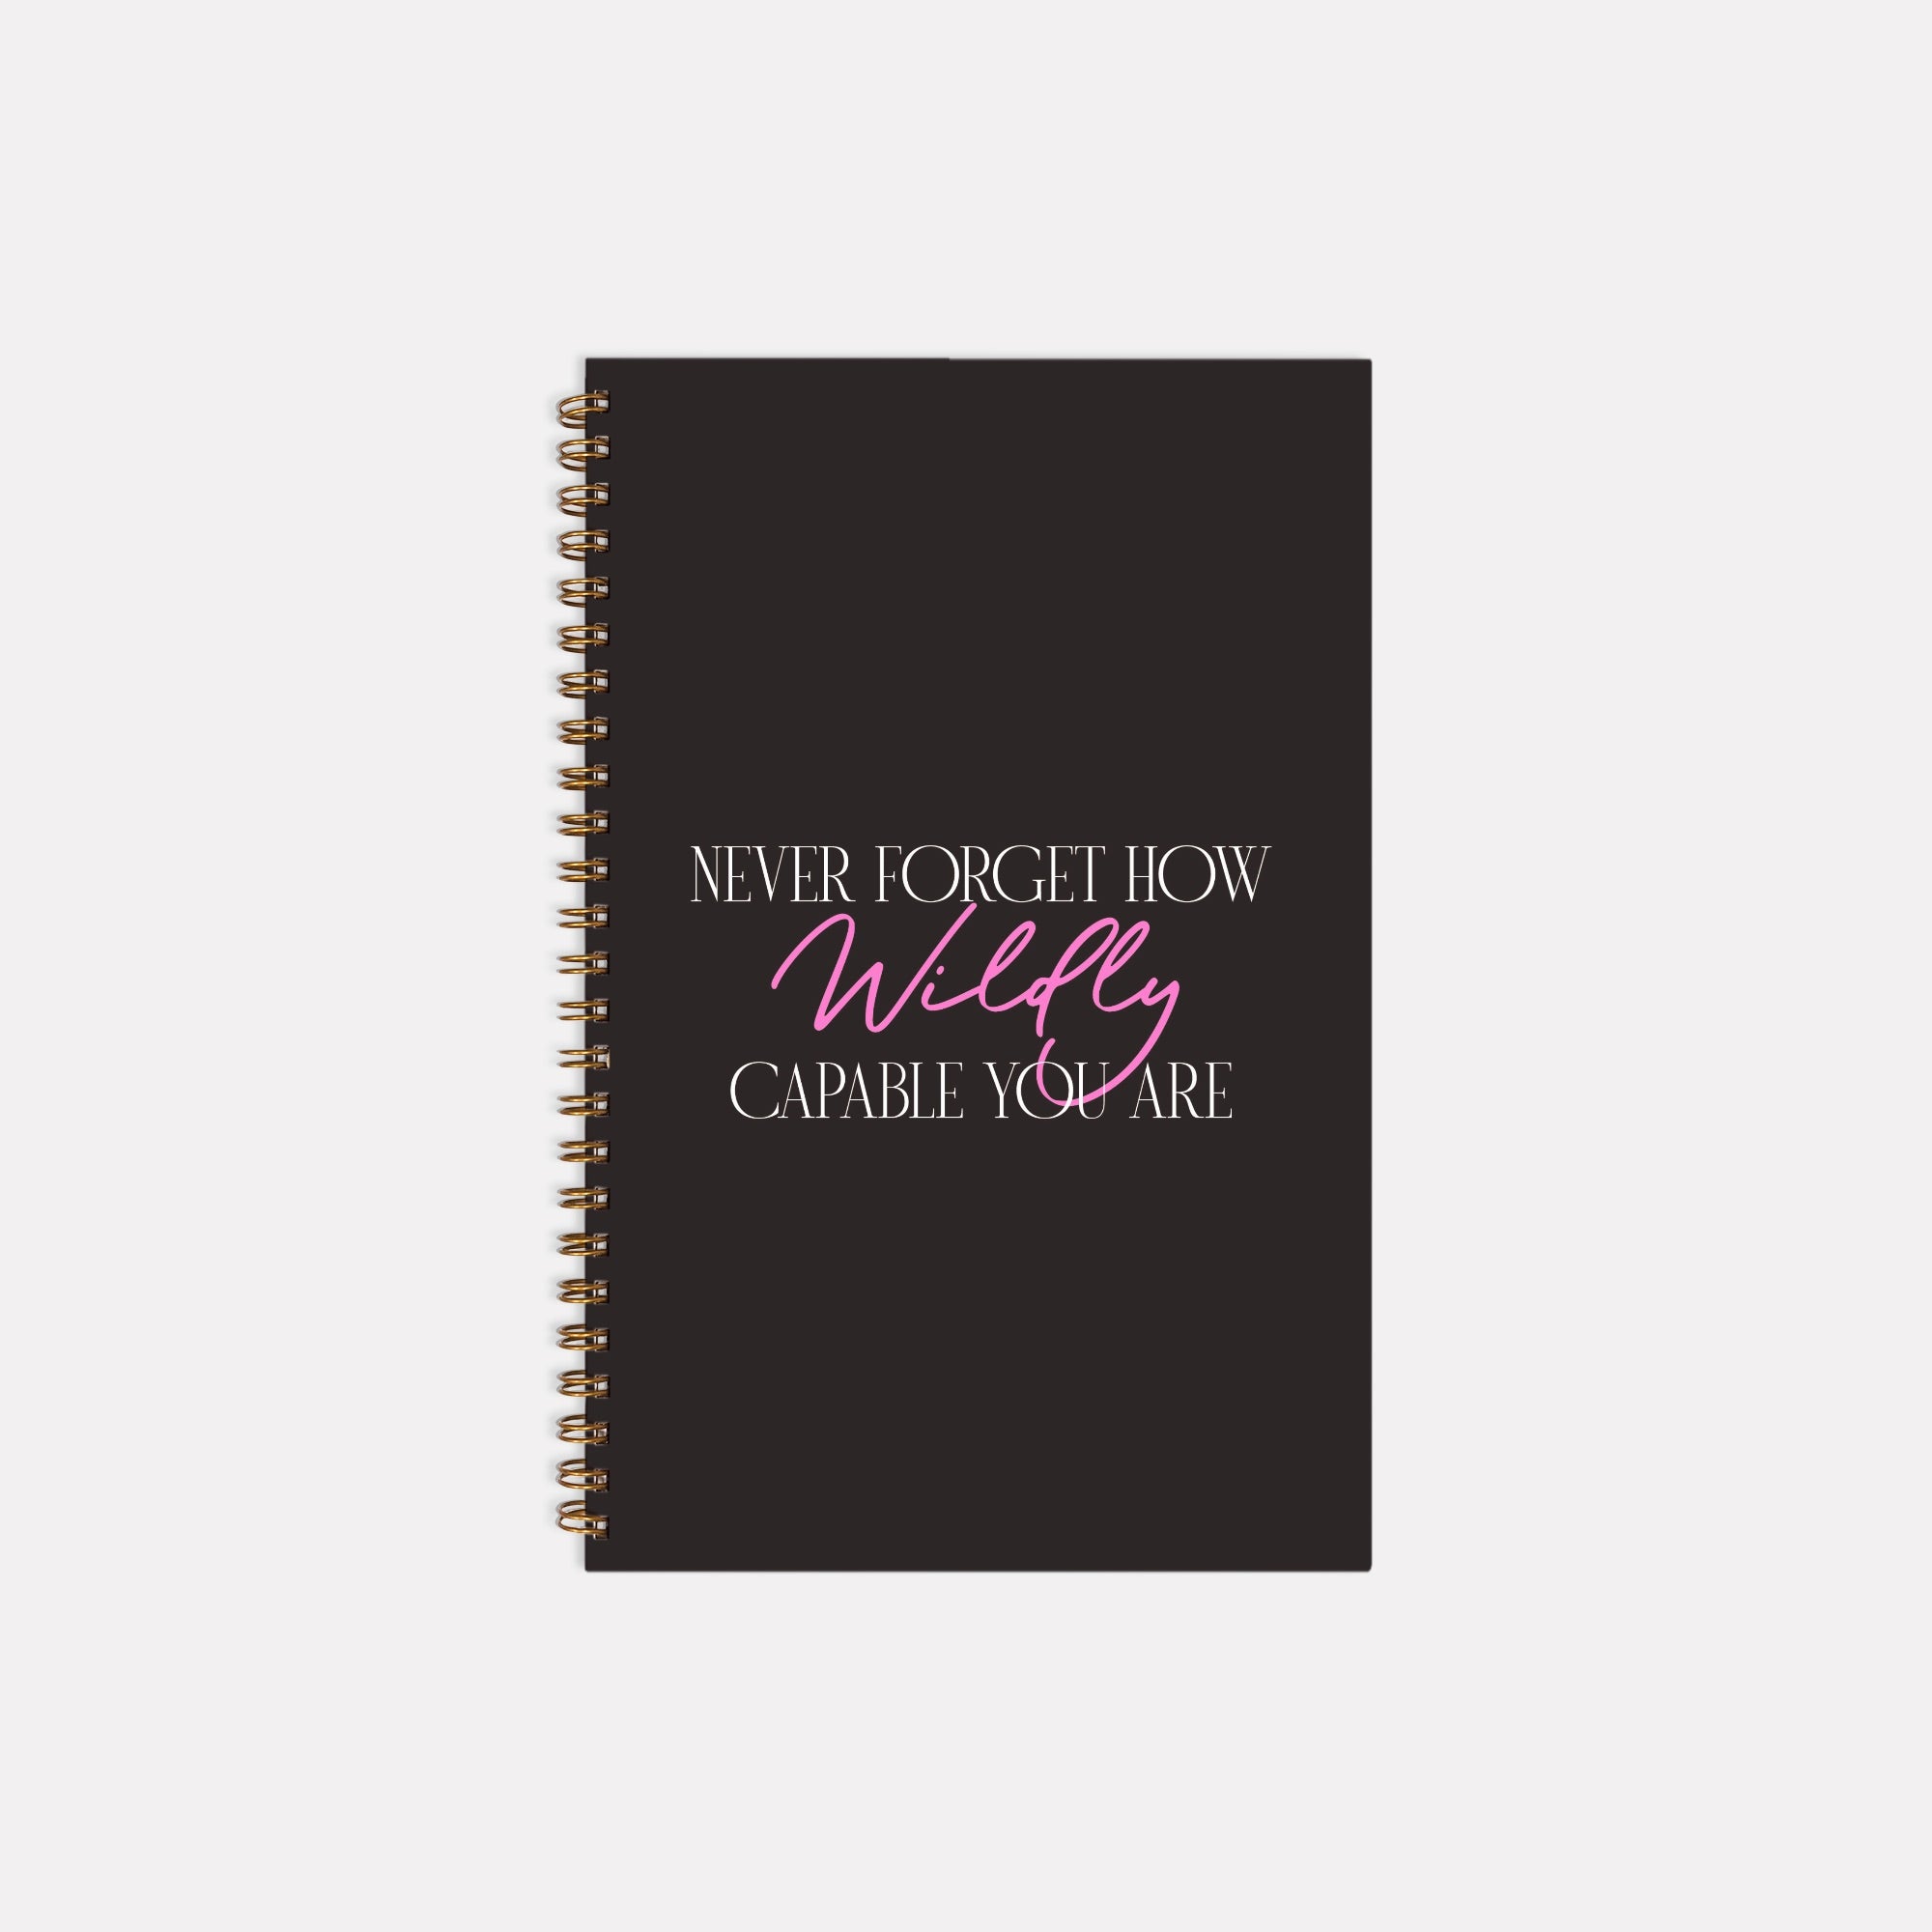 Wildly Capable Notebook Softcover Spiral 5.5 x 8.5